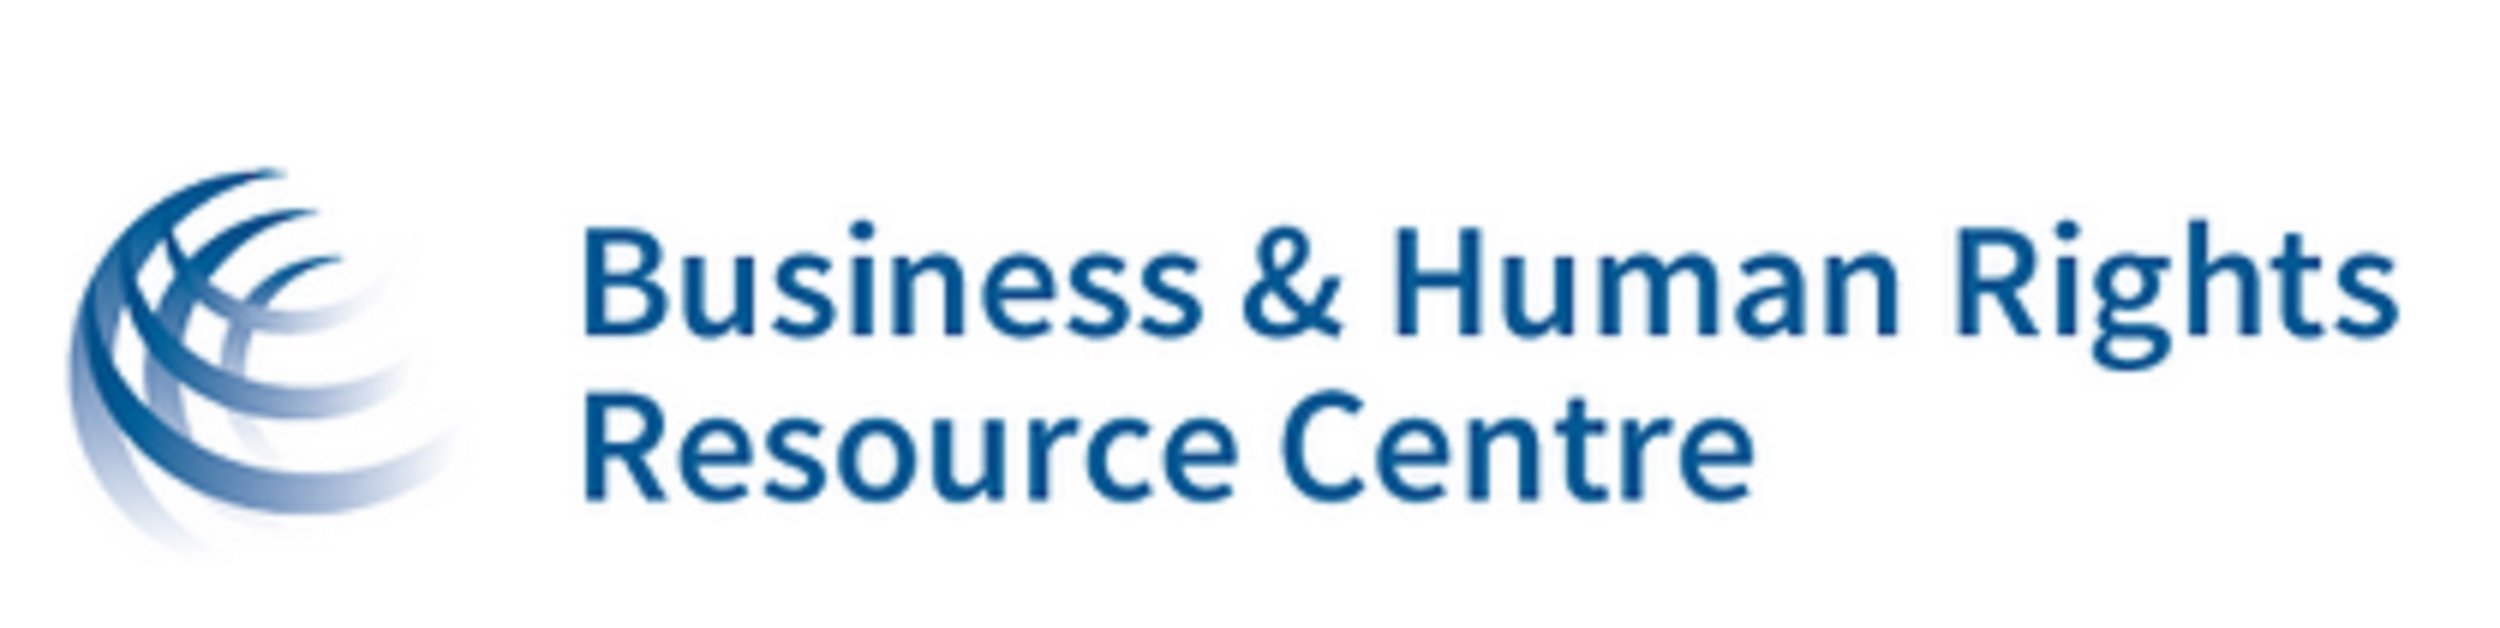 O2116-Business-and-Human-Rights-Resource-Centre.jpg